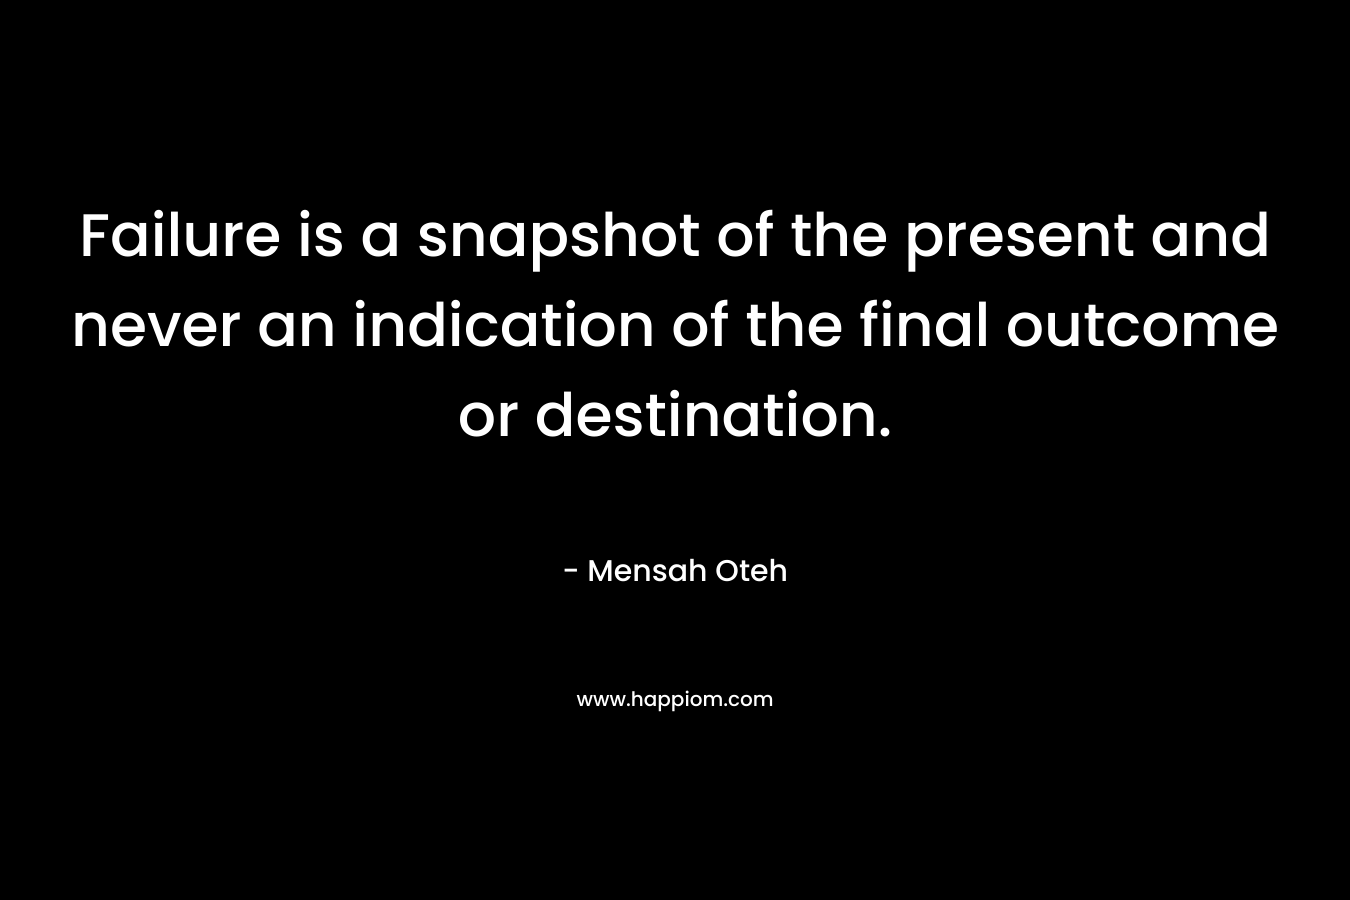 Failure is a snapshot of the present and never an indication of the final outcome or destination.